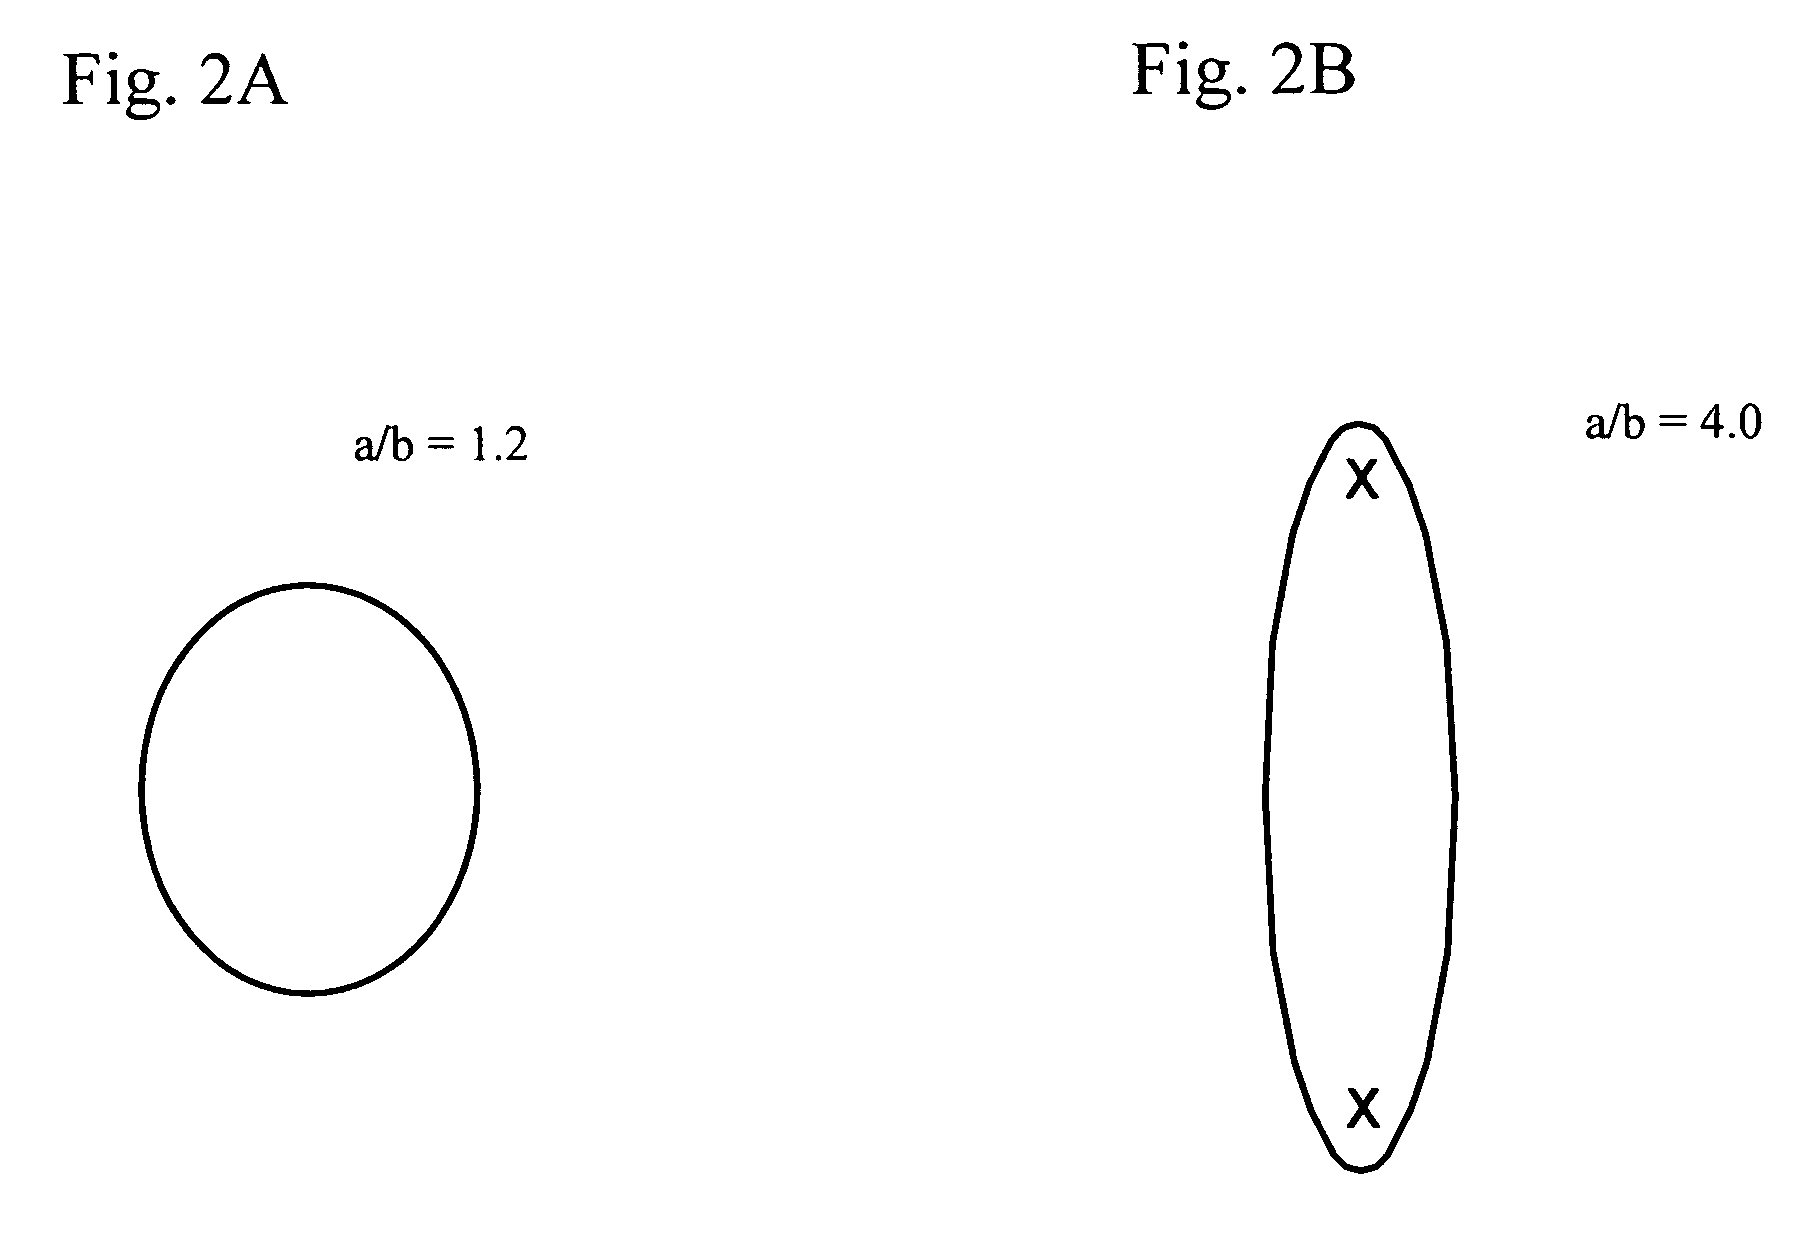 Piezoelectric thin-film resonator and filter using the same